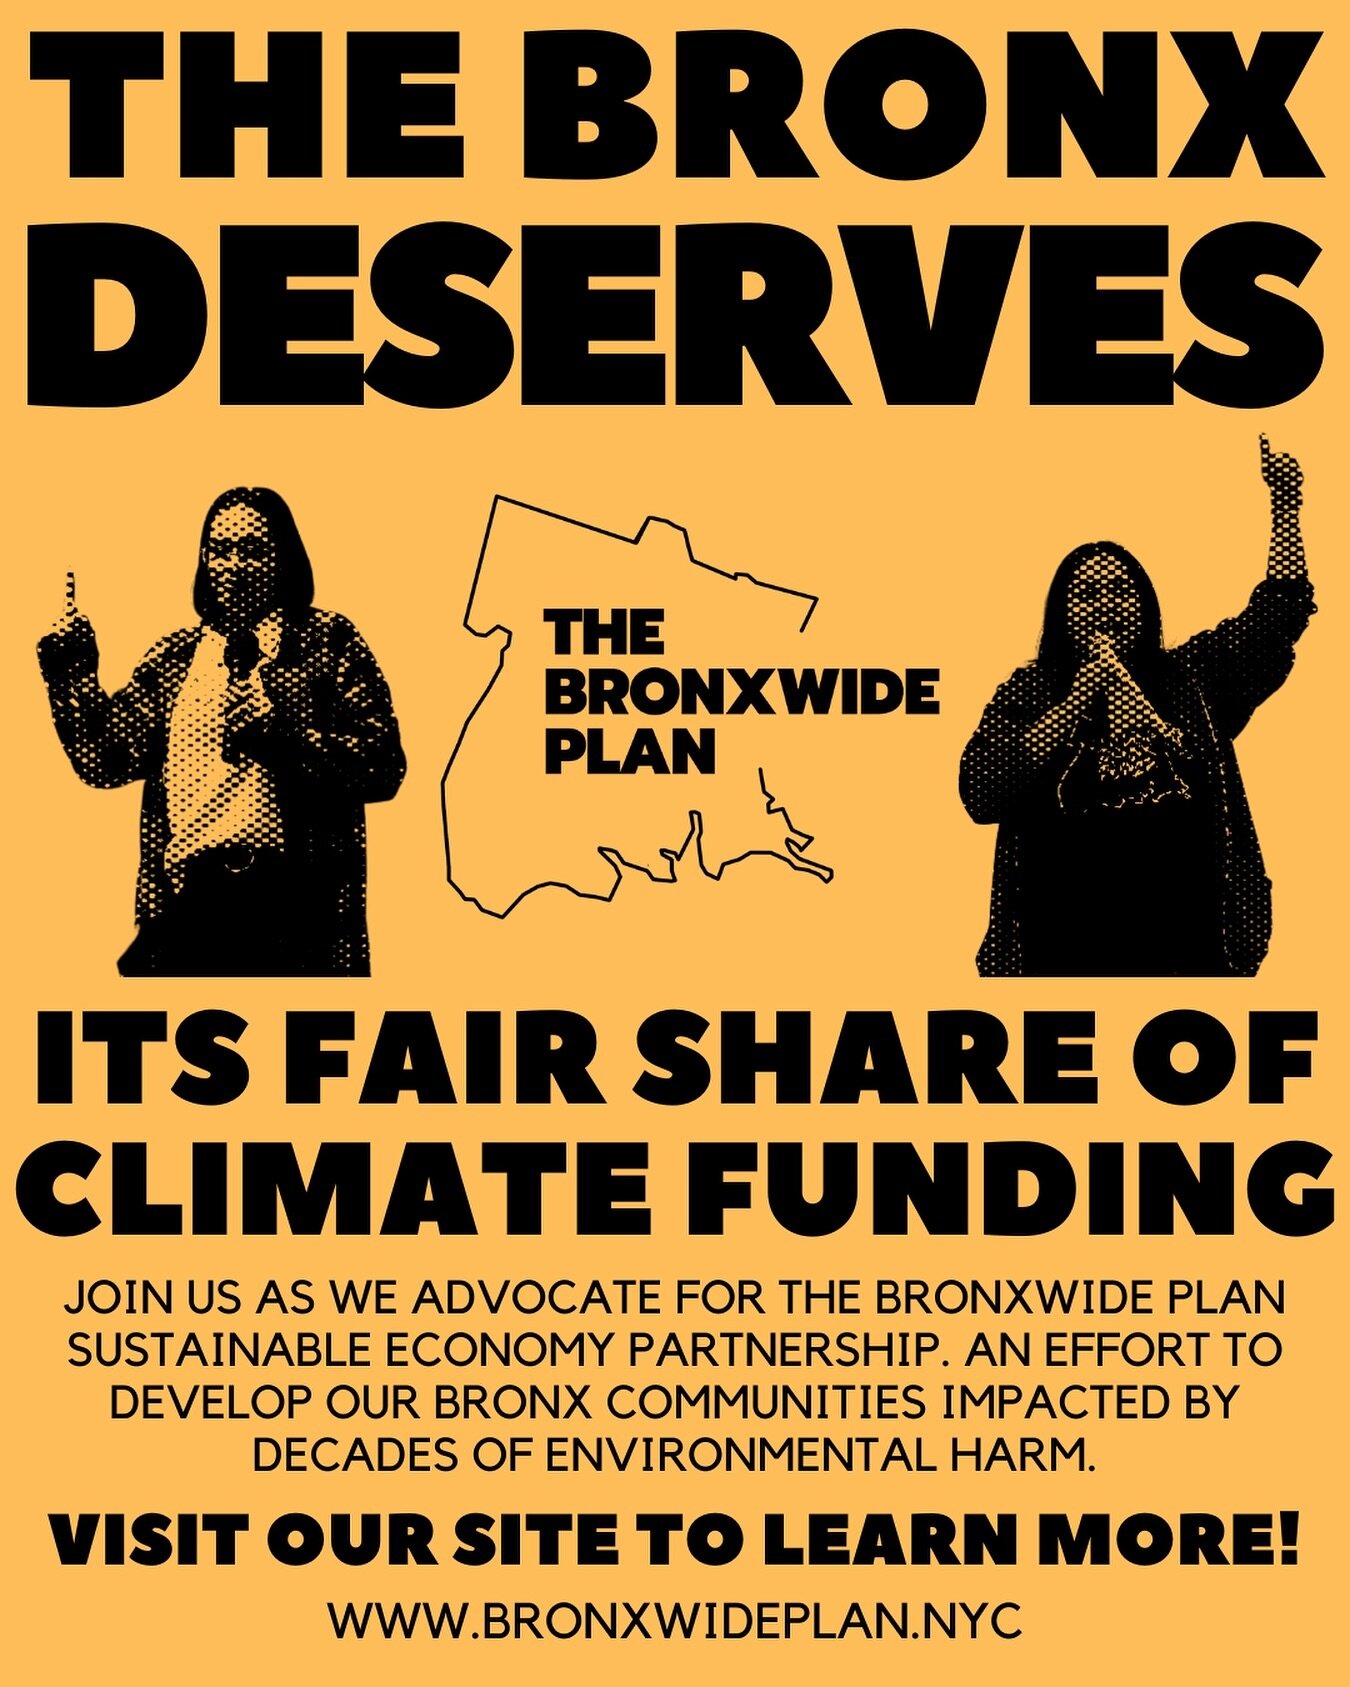 For decades the Bronx has been disproportionately harmed by environmental injustice, and particularly the harms of living in poor housing conditions and with poor air quality!

We deserve better and we demand that our state legislators direct critica